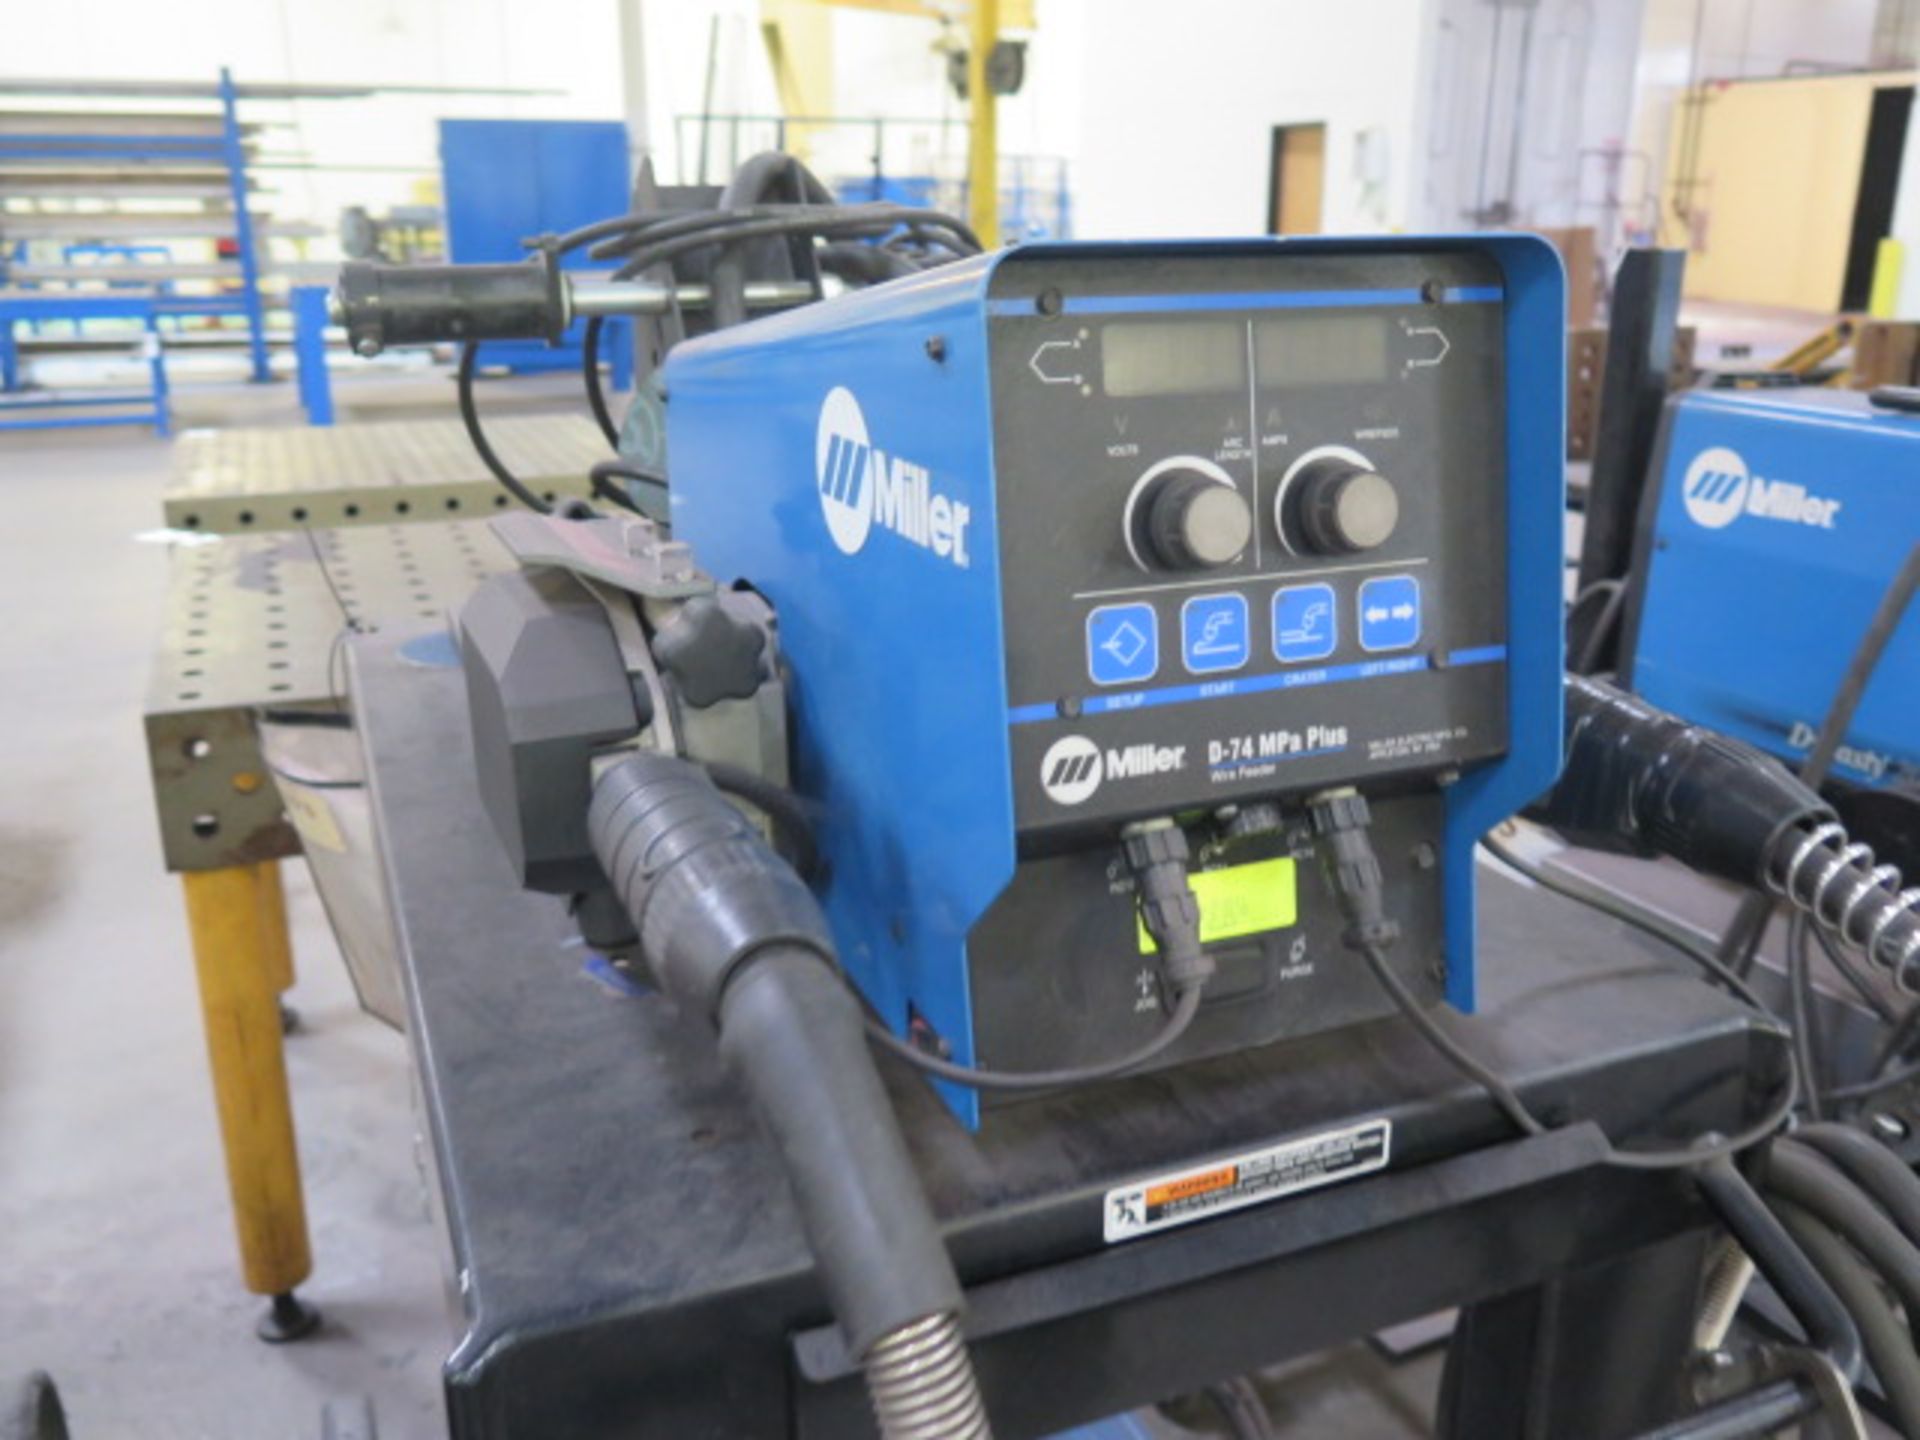 Miller Invision 352 MPa Auto-Line Series Arc Welding Power Source s/n MC220584U w/ Miller D-74 MPa - Image 5 of 7